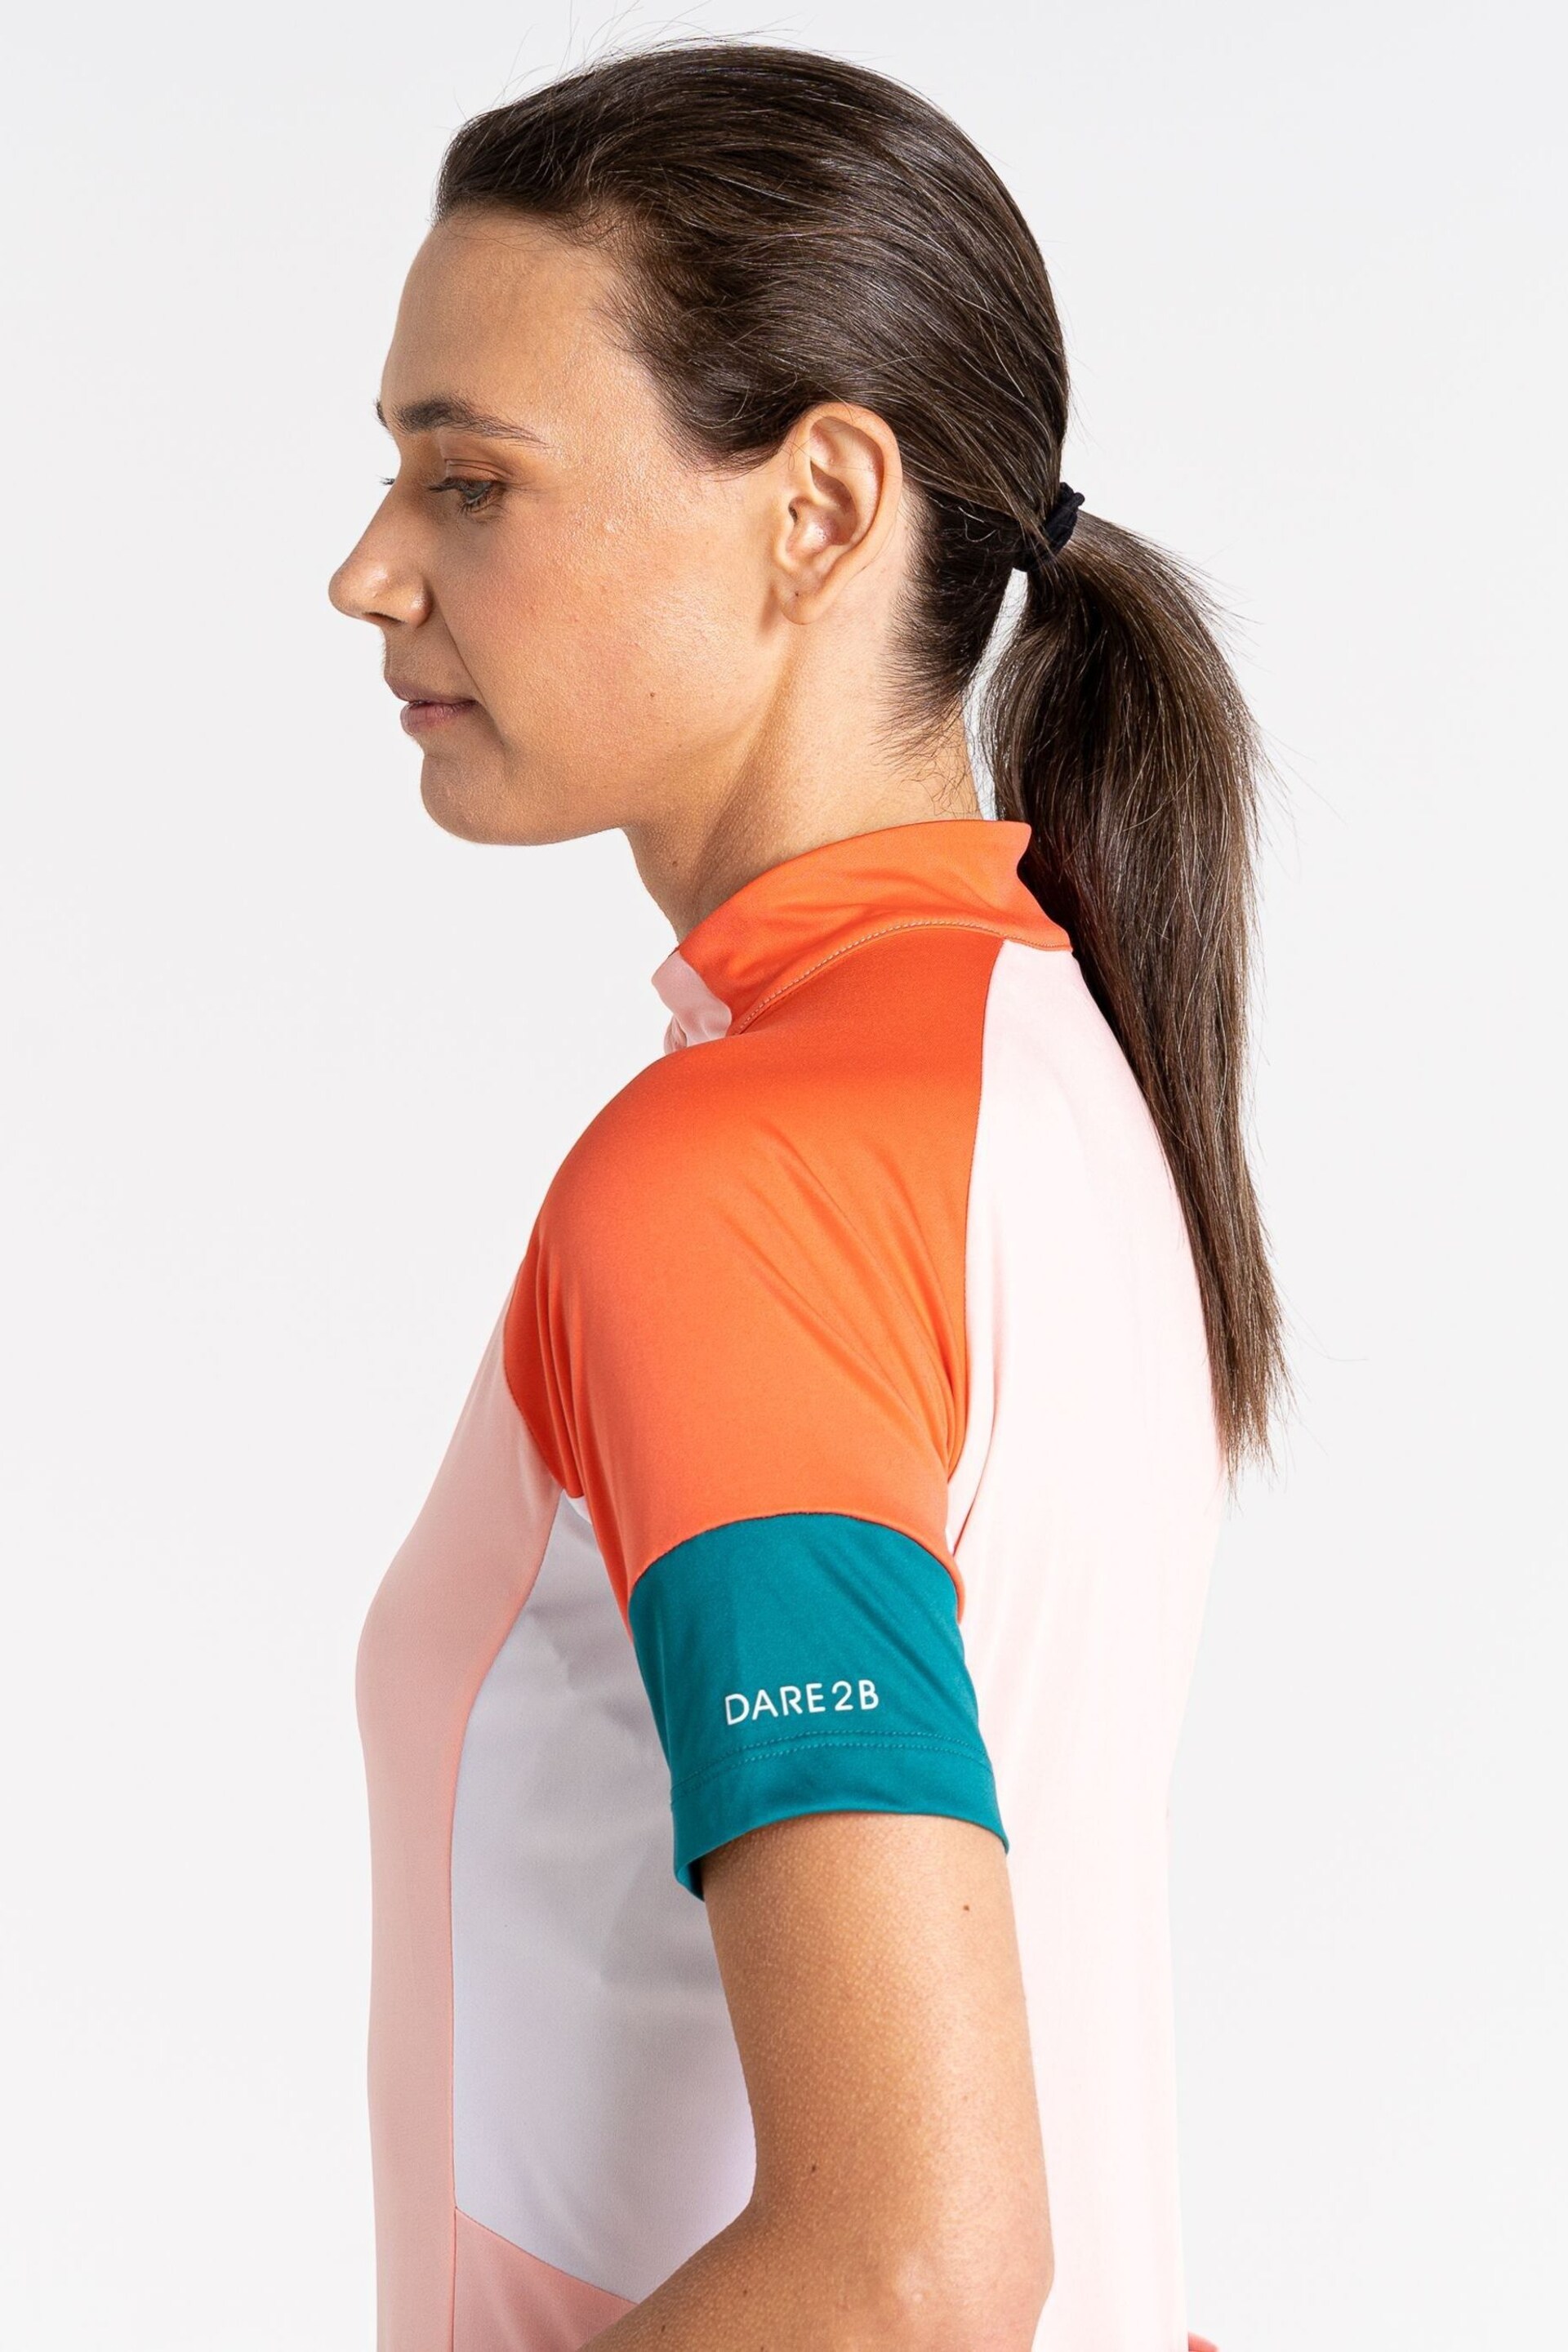 Dare 2b Compassion II Cycle Jersey - Image 6 of 6